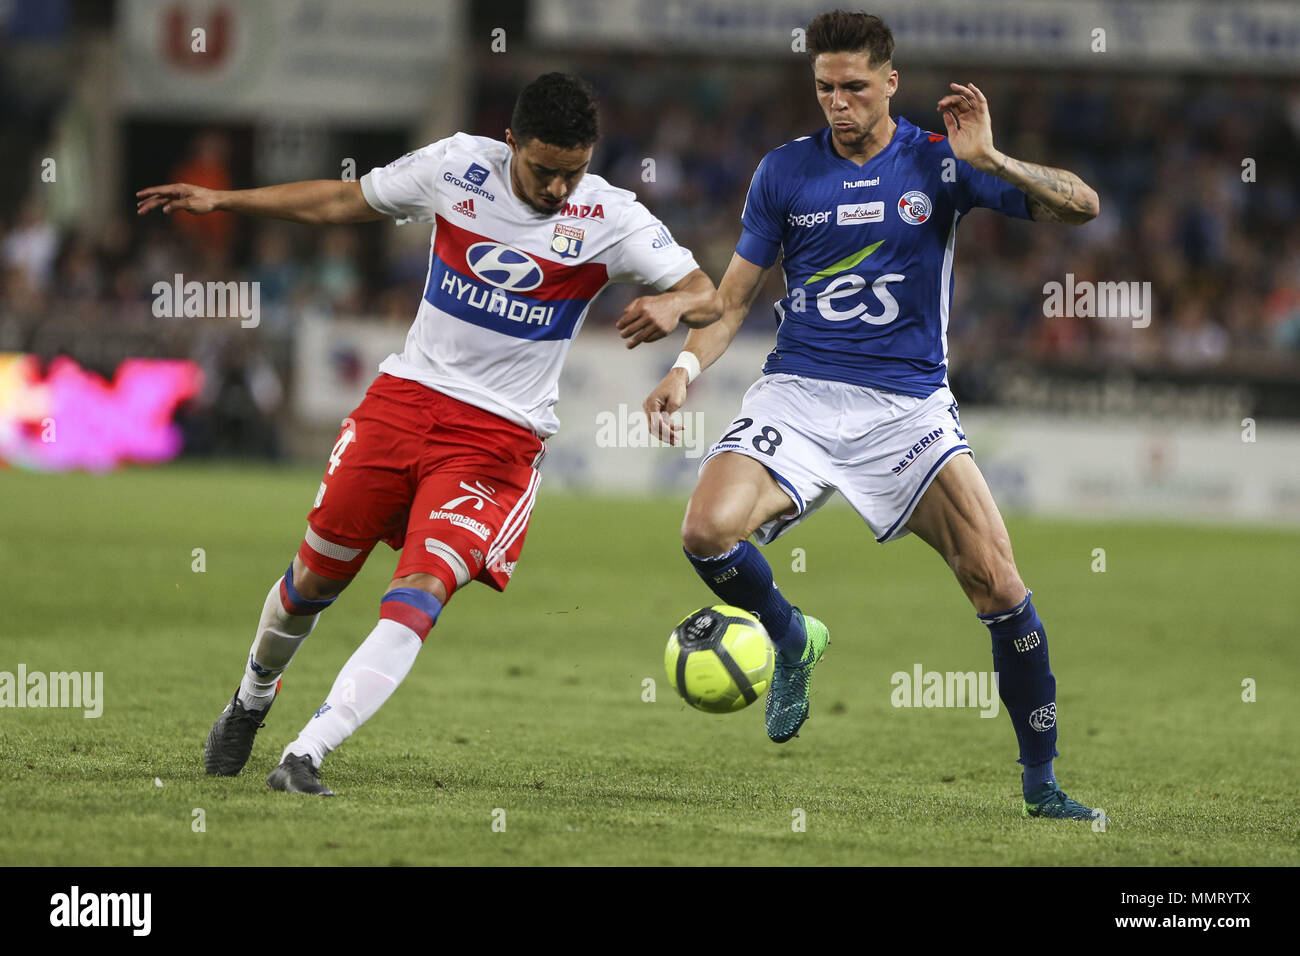 Strasbourg, France. 12th May, 2018. Pereira Da Silva Rafael (L) and Martin Jonas (R) in action during the French L1 football match between Strasbourg (RCSA) and Lyon (OL) at the Meinau stadium.Final Score Credit: Elyxandro Cegarra/SOPA Images/ZUMA Wire/Alamy Live News Stock Photo